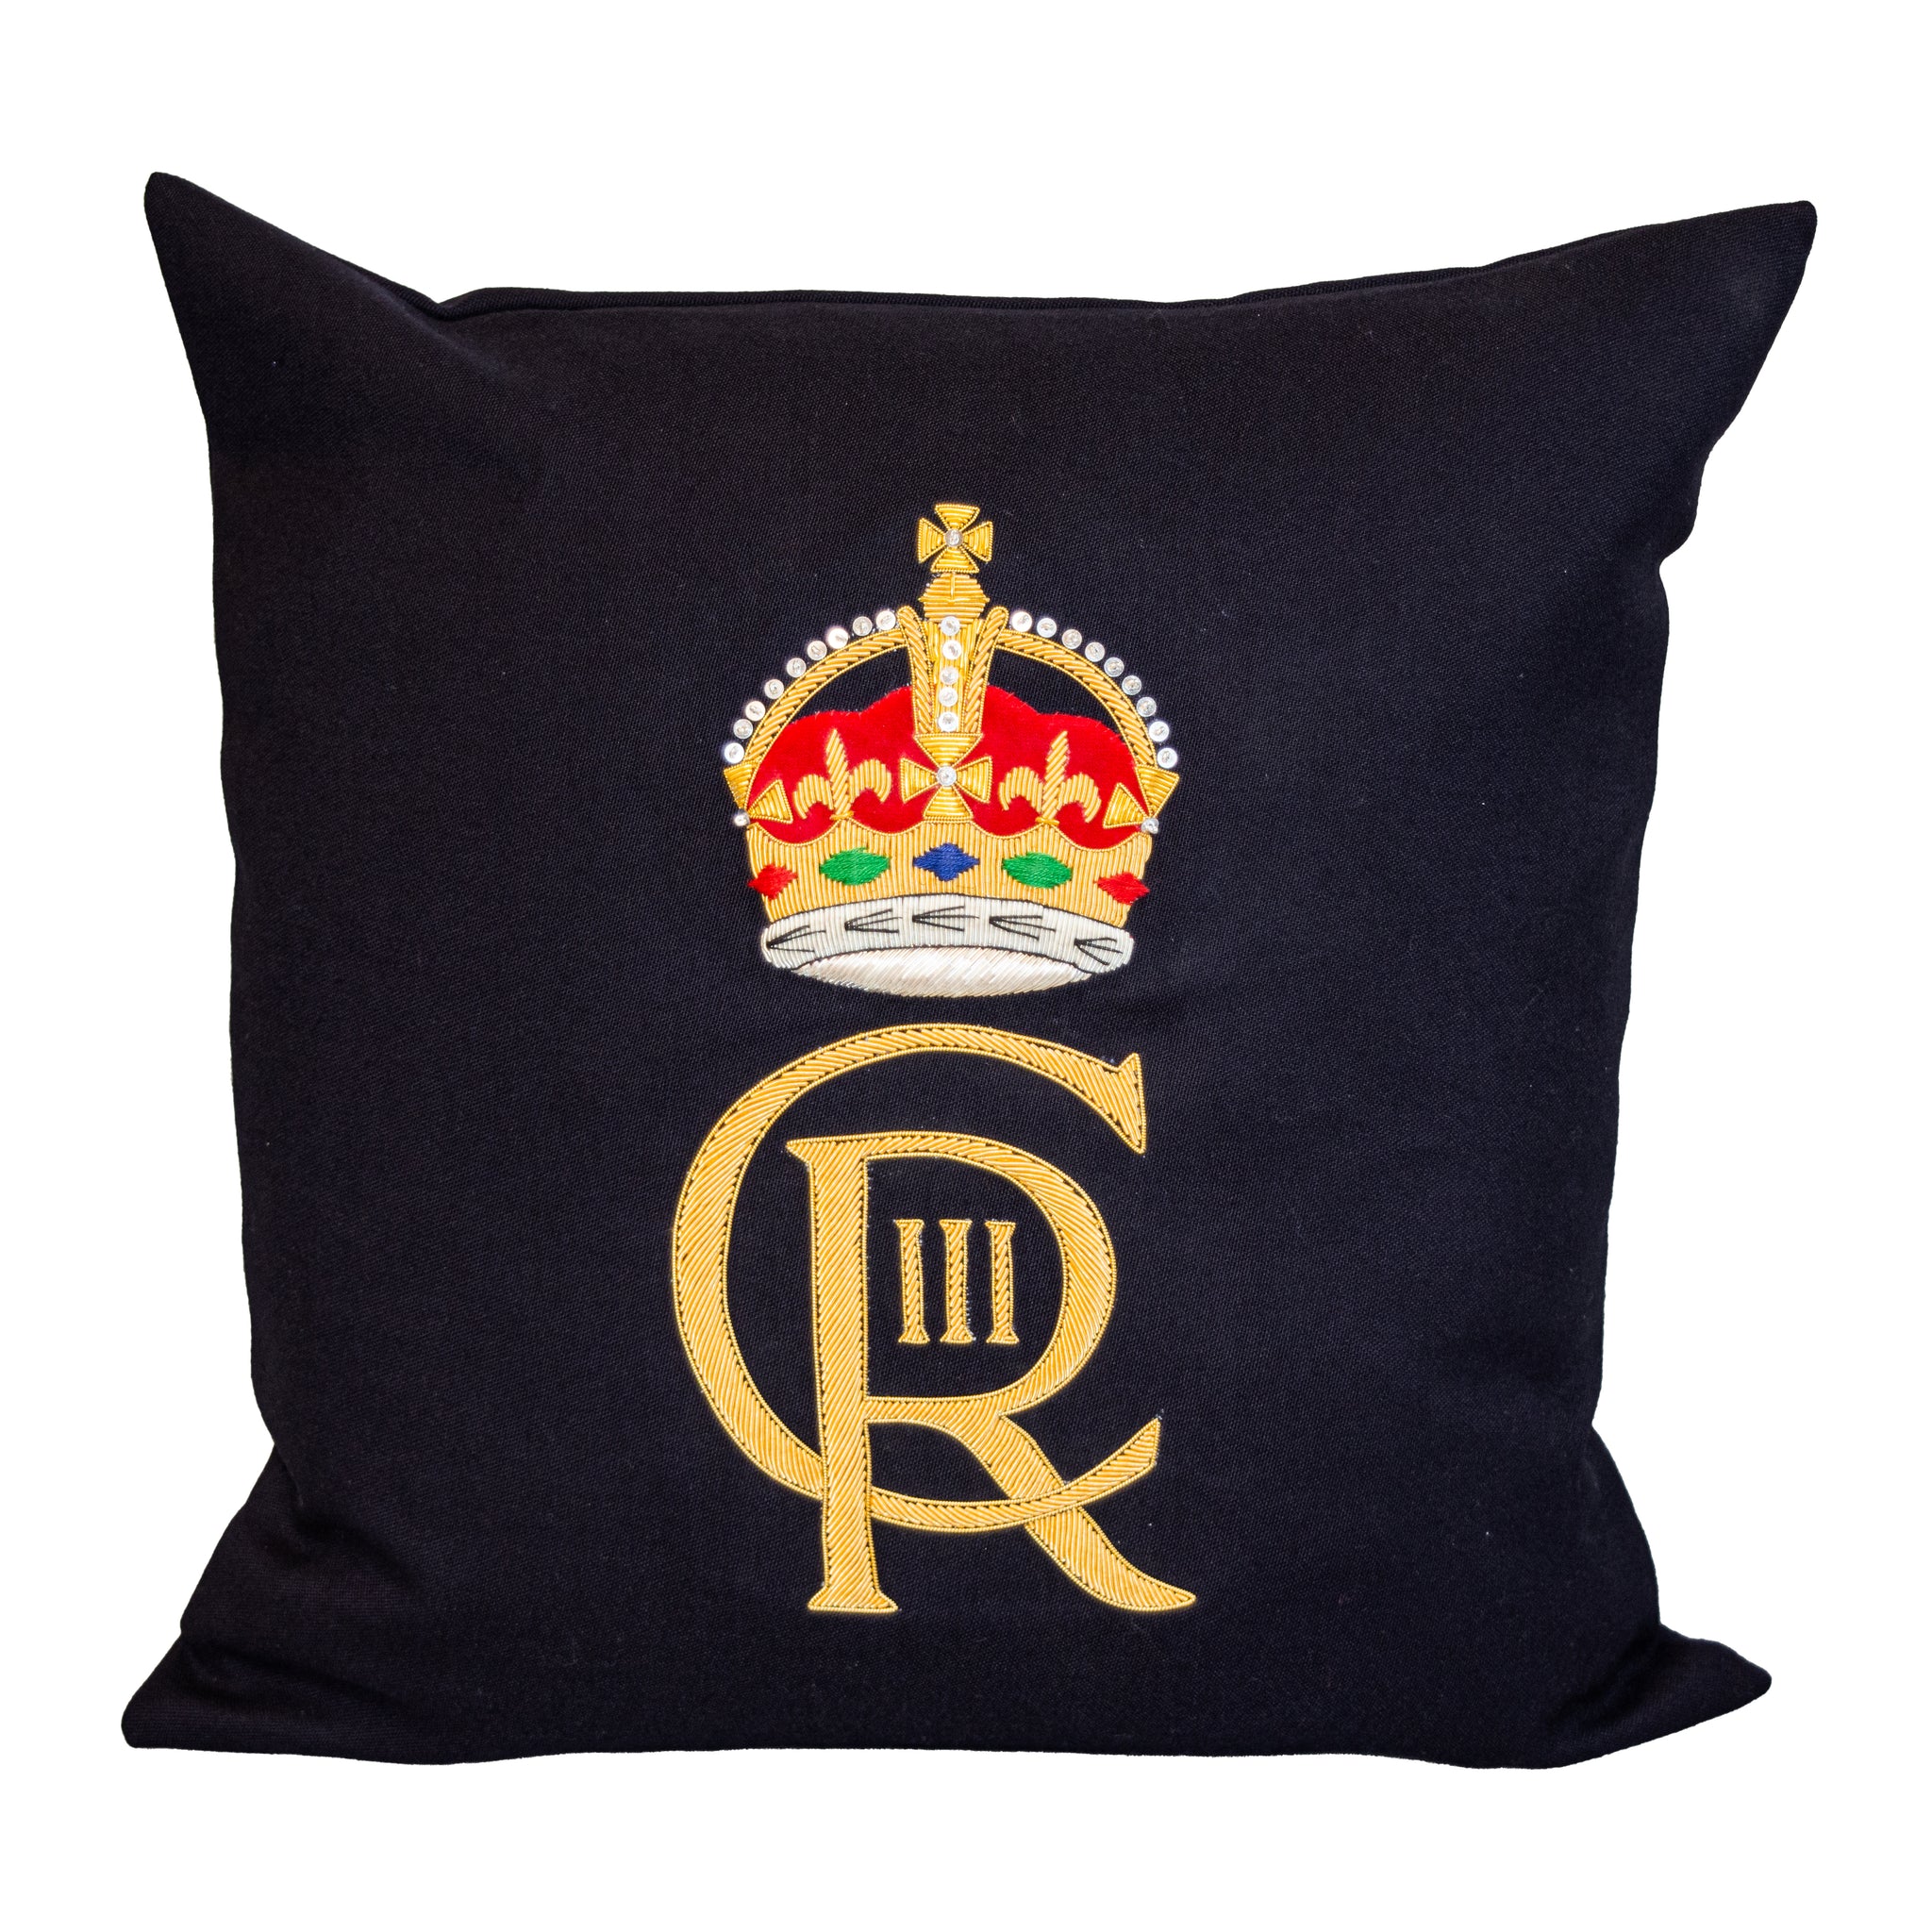 CIIIR Cypher (King's Crown) Hand Embroidered Cushion Cover